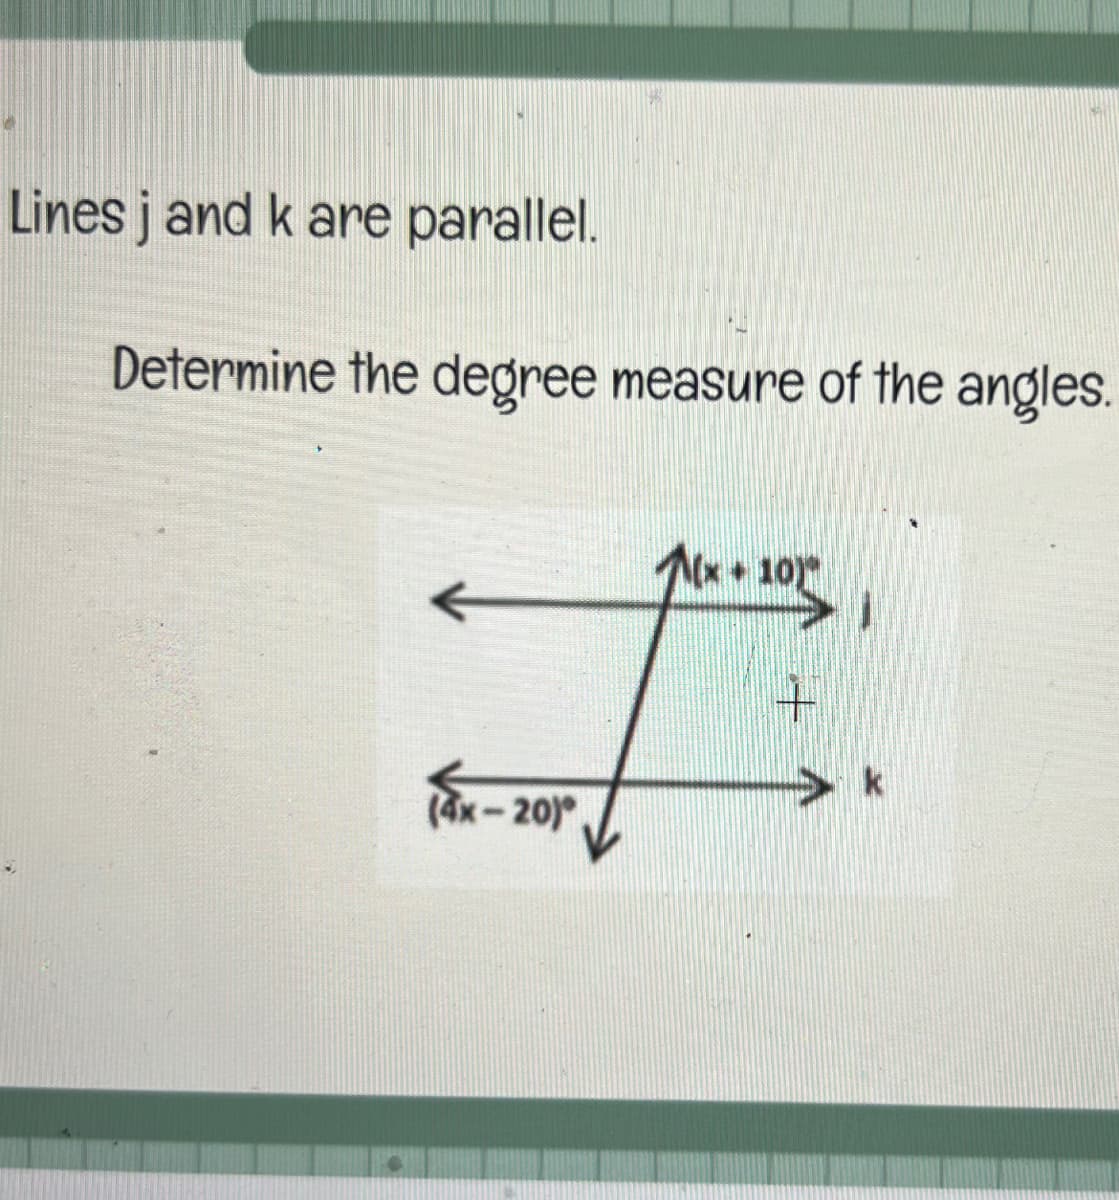 Lines j and k are parallel.
Determine the degree measure of the angles.
(4x-20)
Mx + 10)"
k